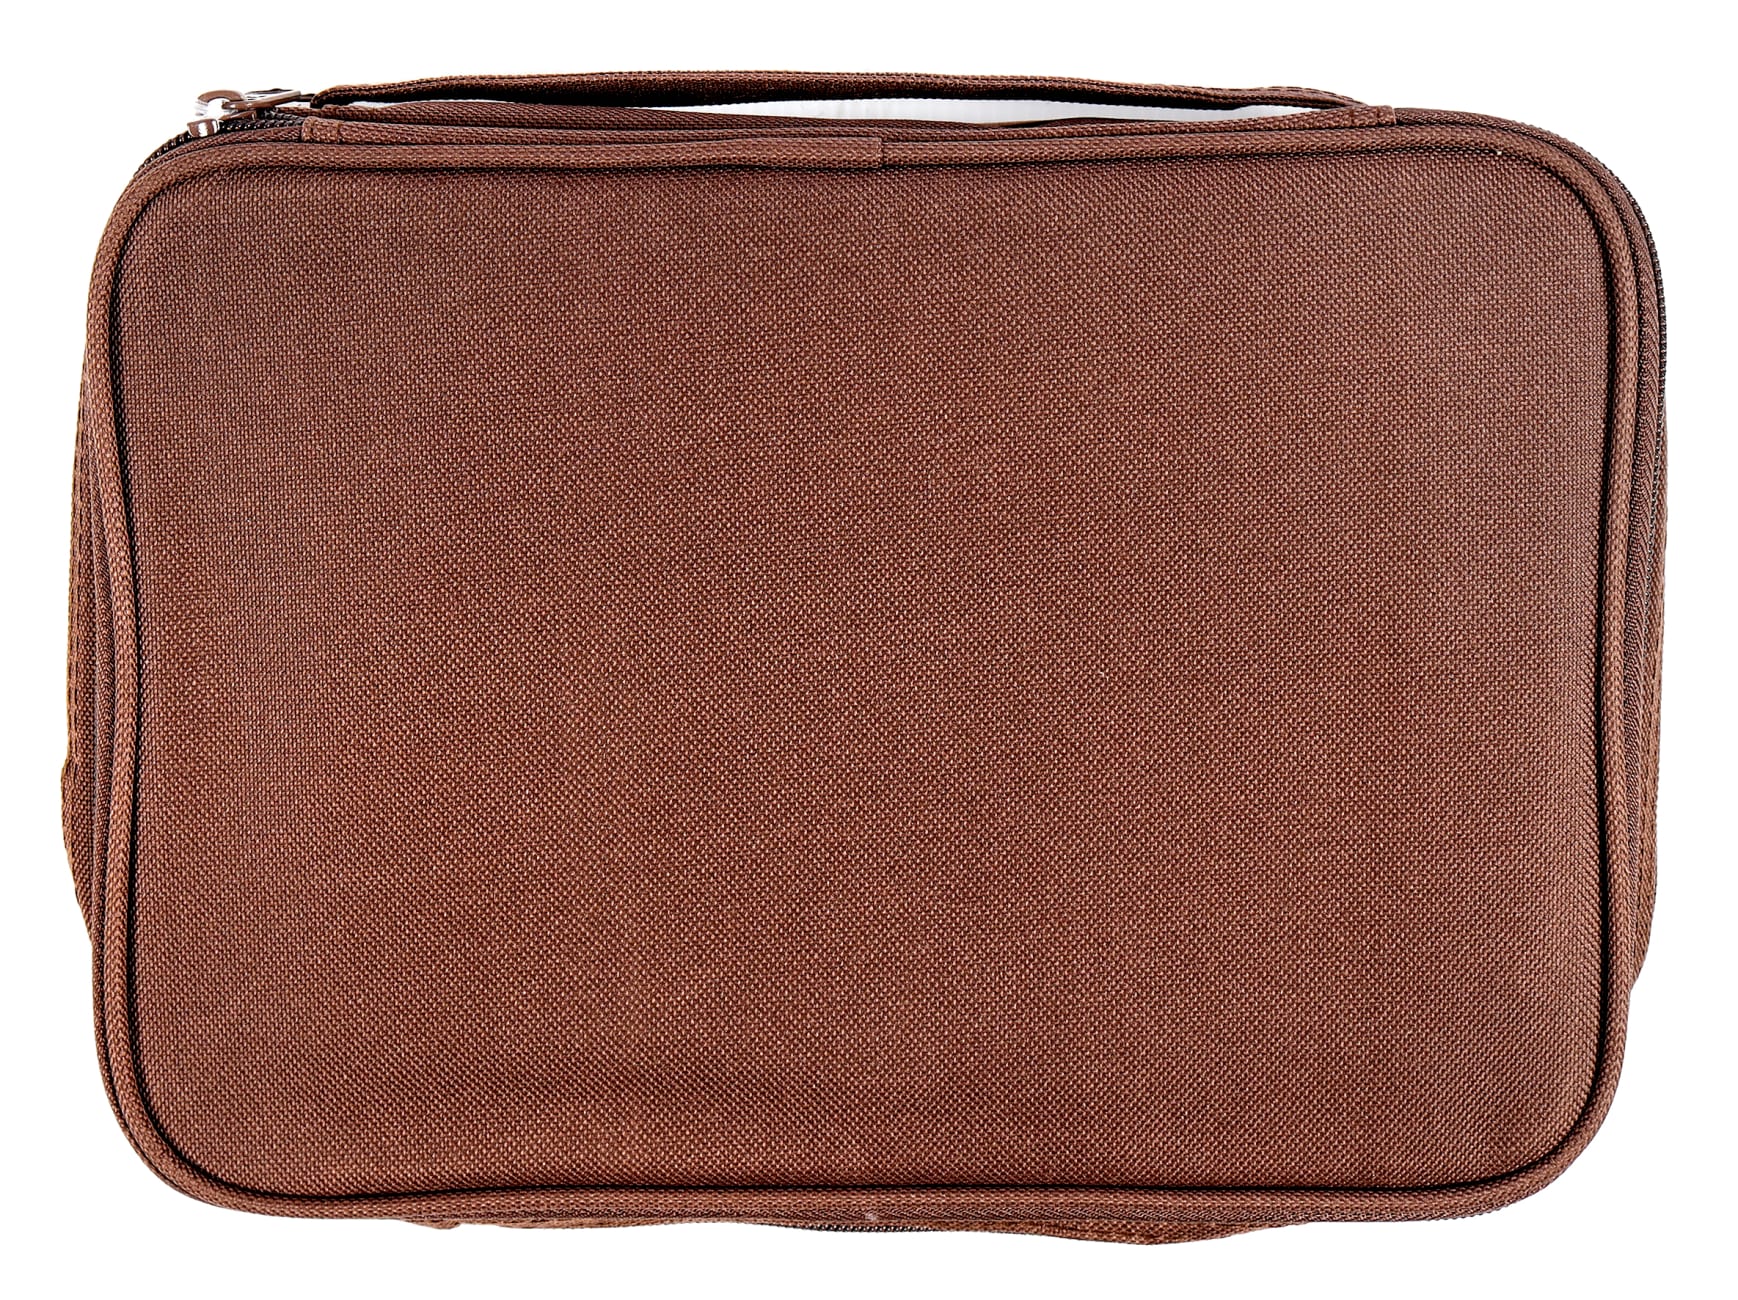 Bible Cover Brown Canvas Organiser Extra Large Includes Pens and Notepad Bible Cover